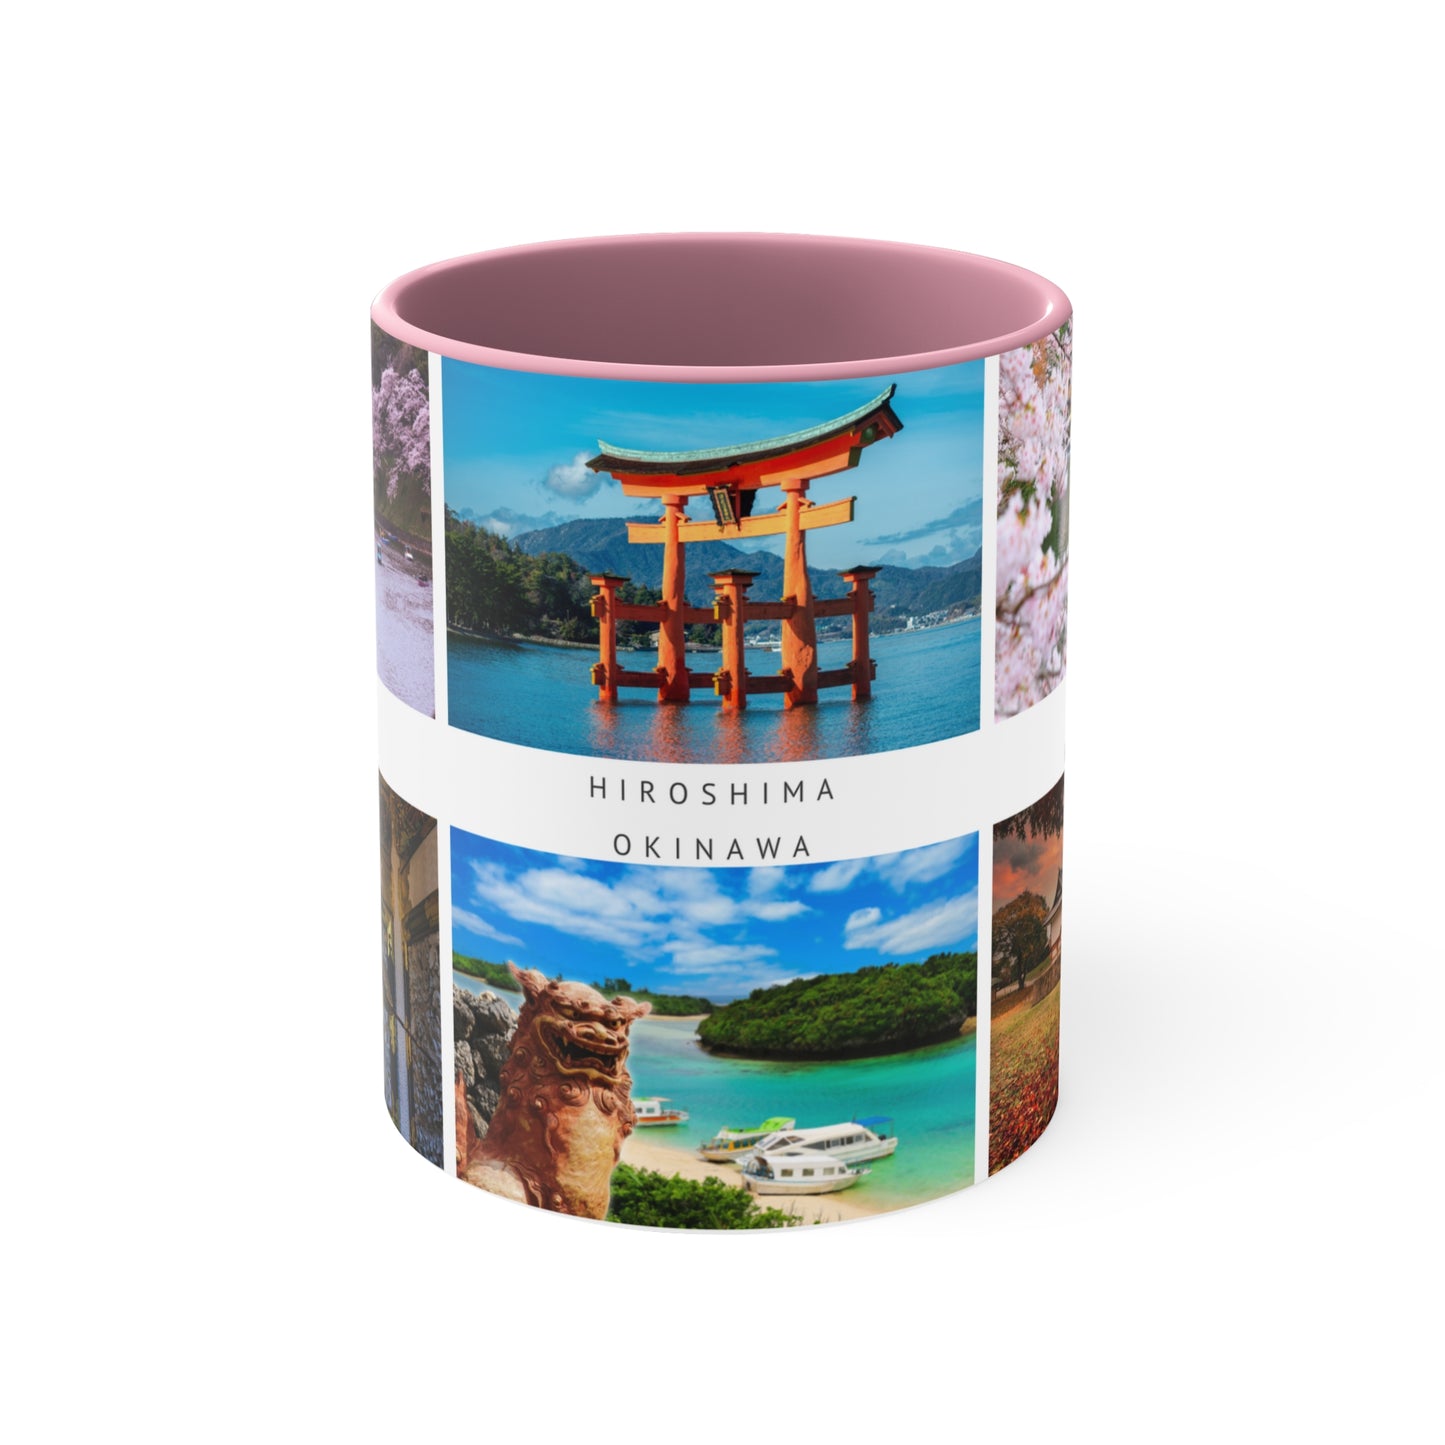 Japan! This Travel Accent Coffee Mug is a part of a Travel Series for you to choose from. 11oz. Great as a gift or get one to enjoy yourself.